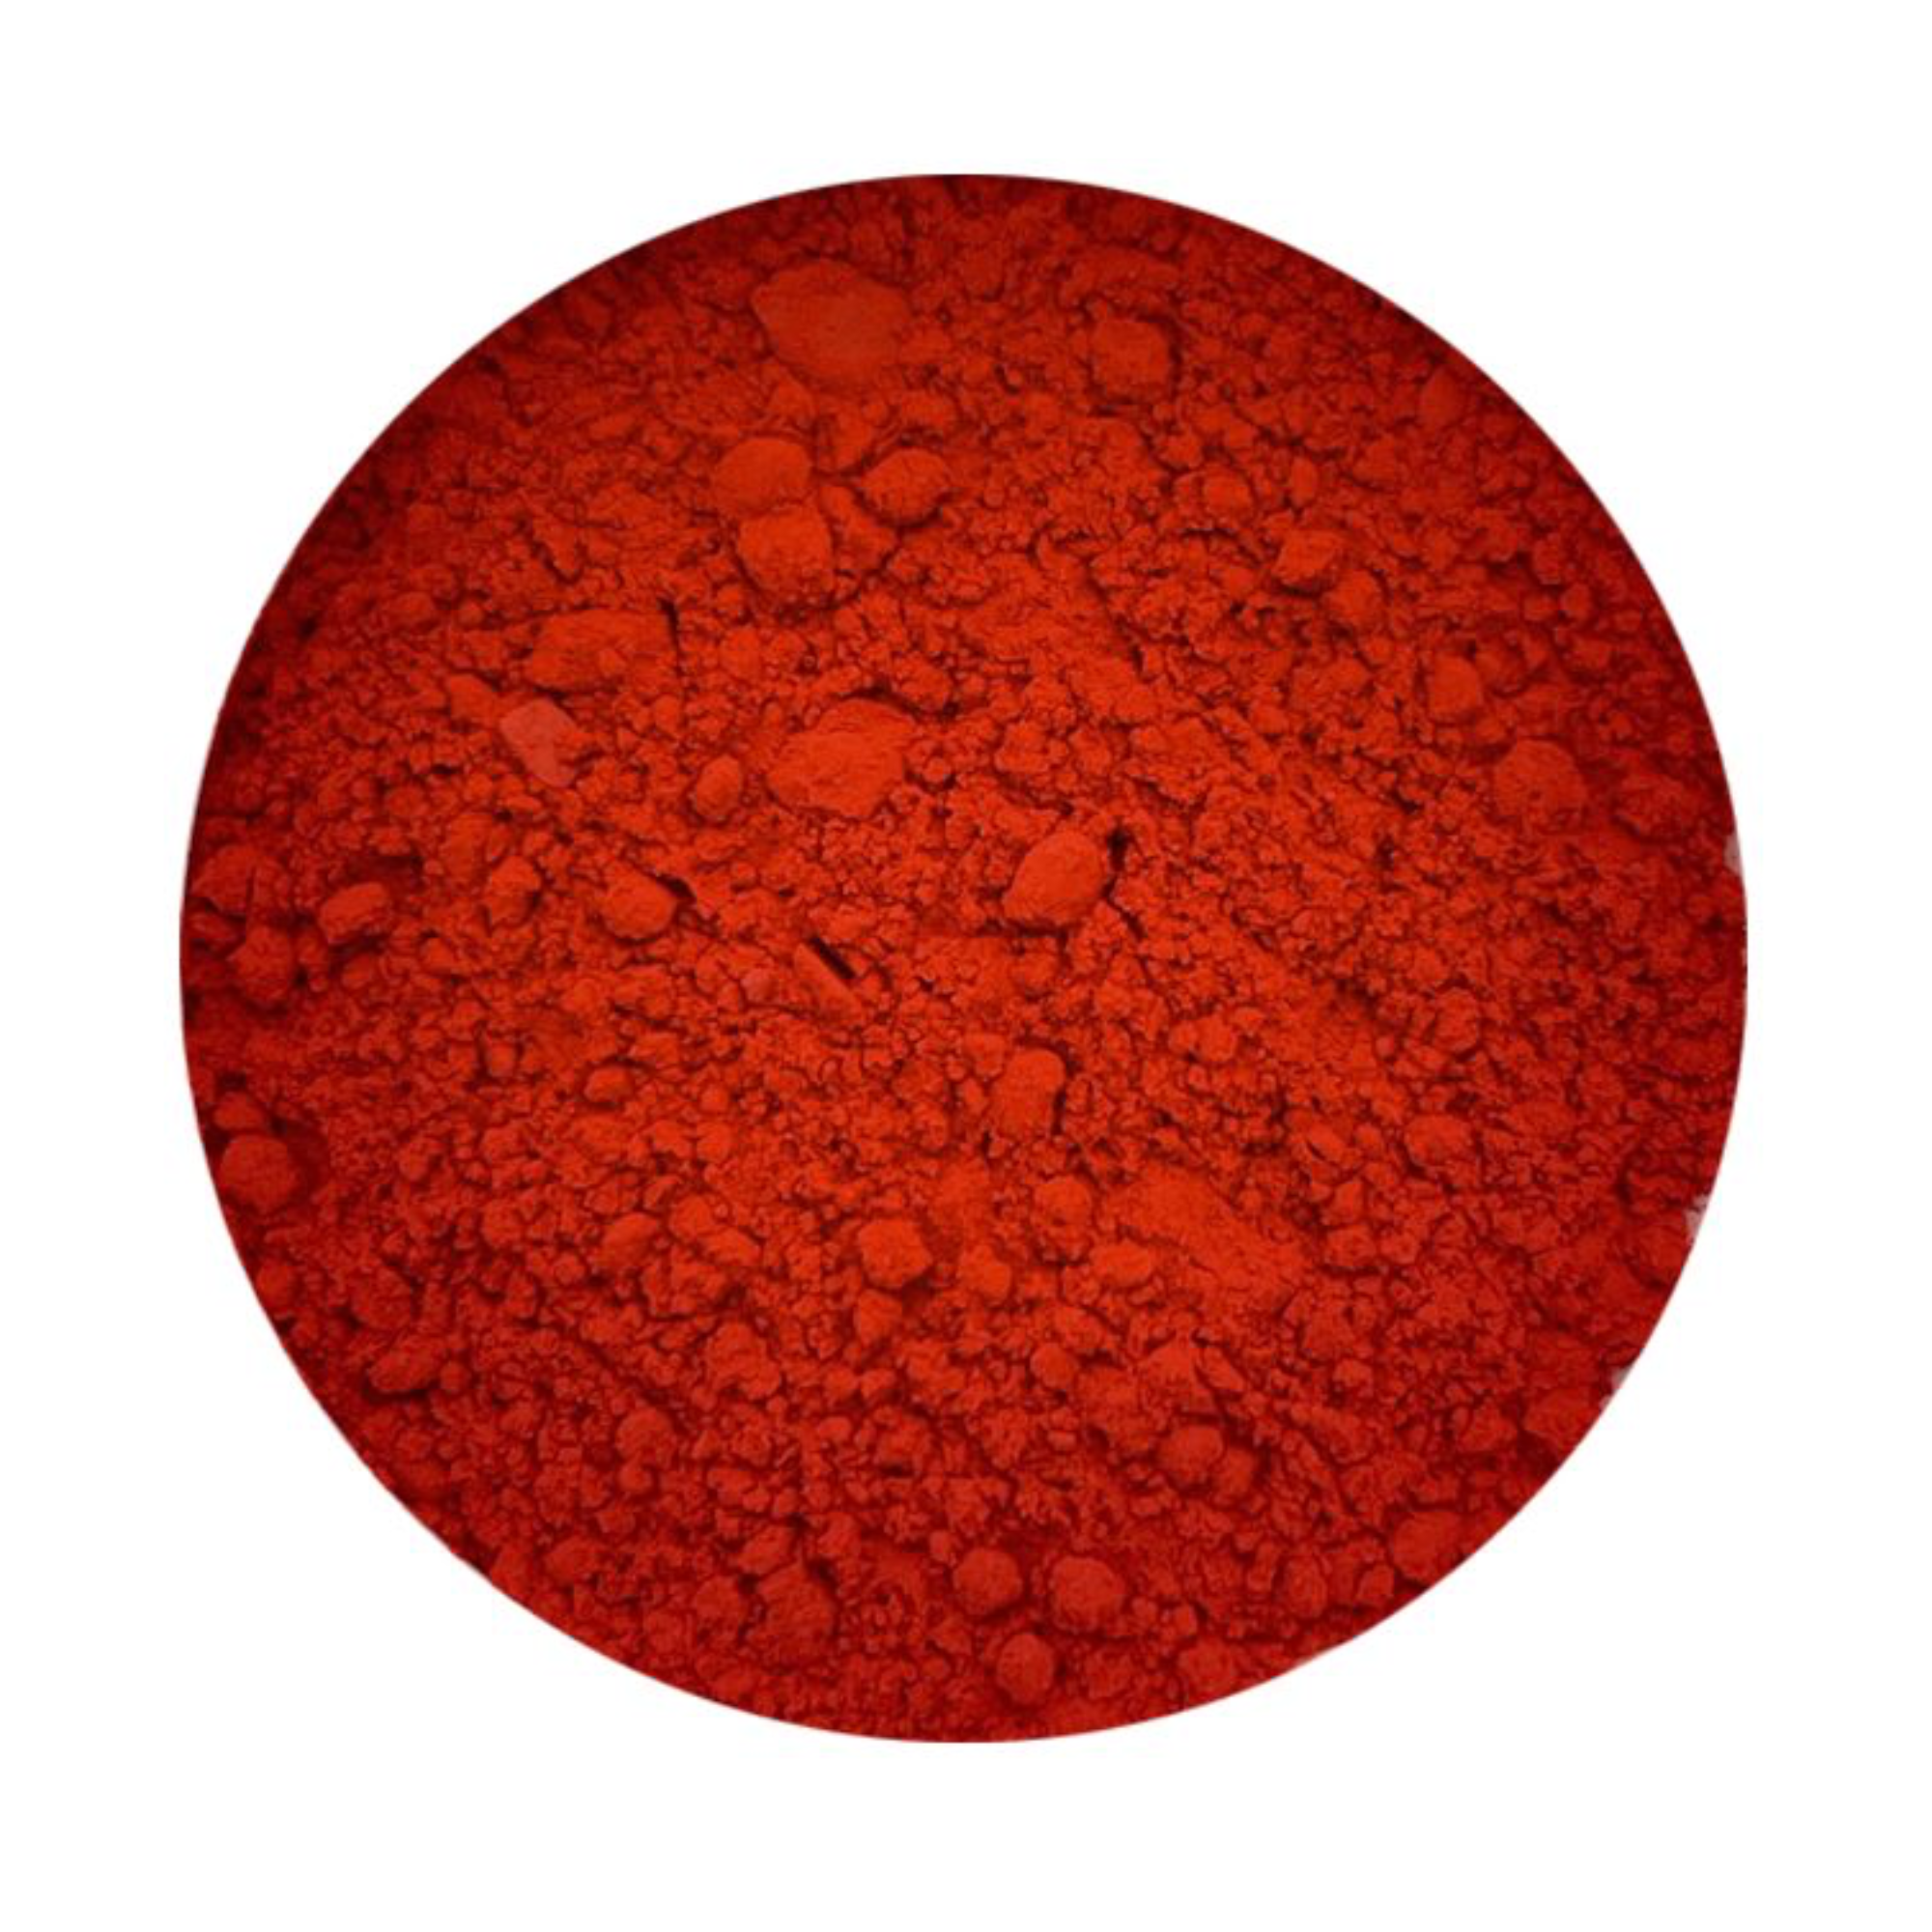 Powercolor Powder Pigment Red 40ml